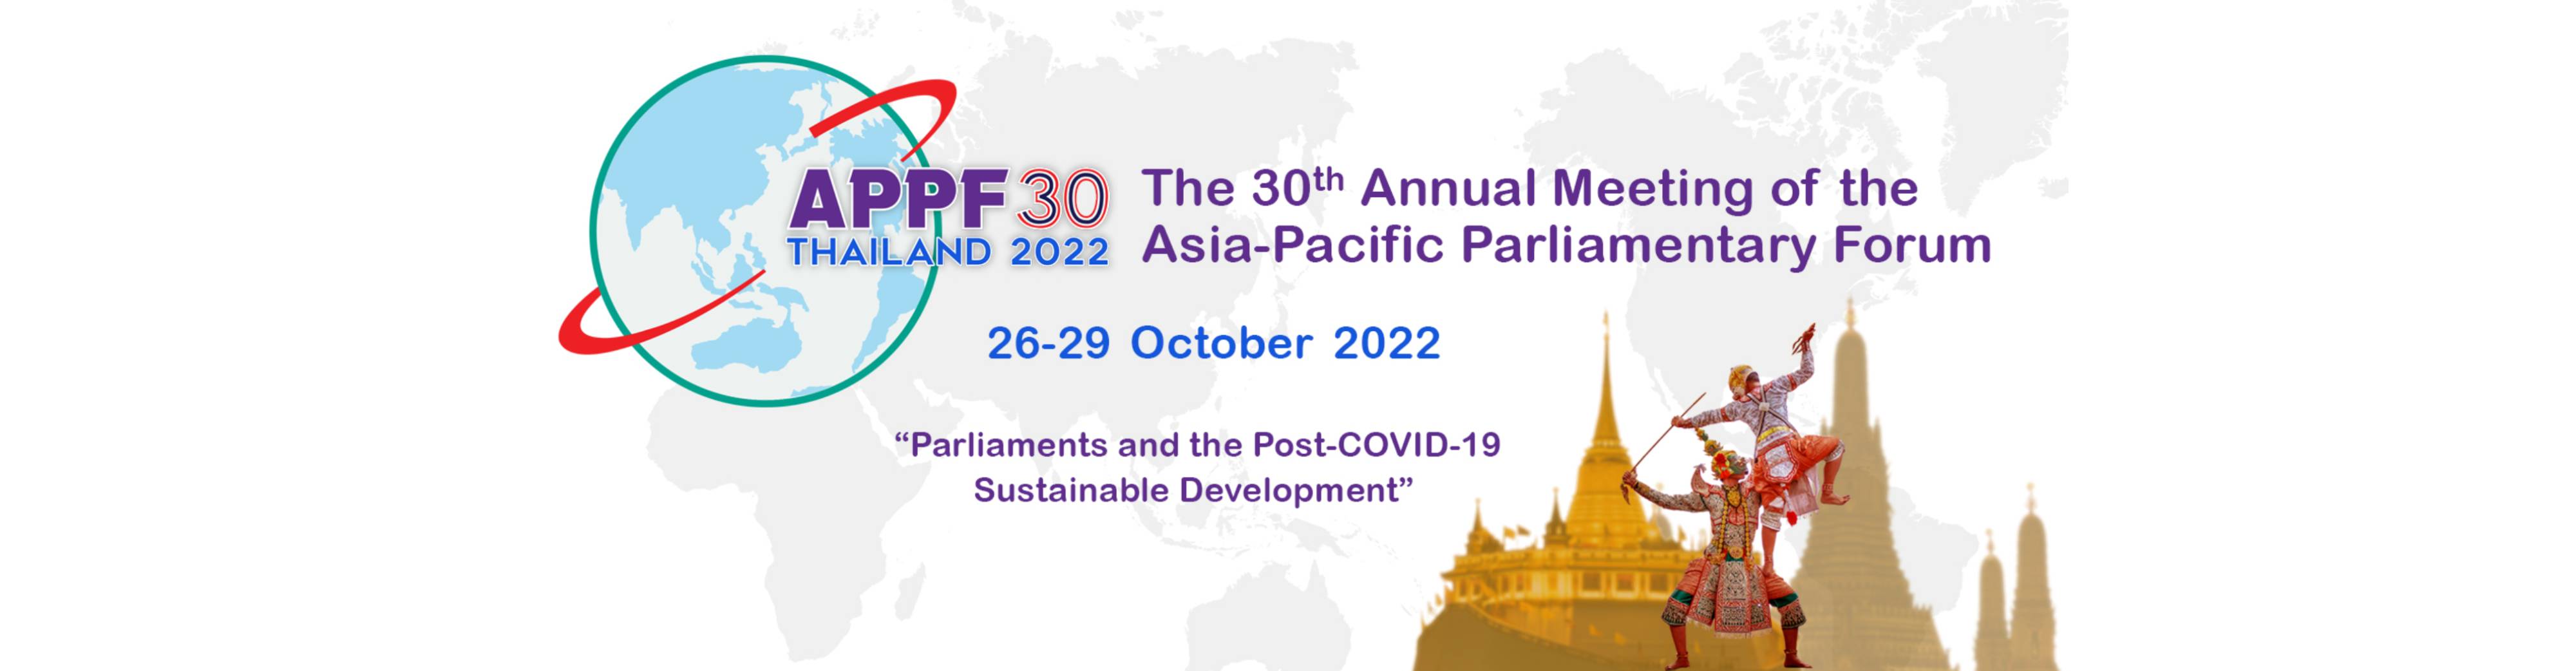 Asia Pacific Parliamentary Forum (APPF 30) 